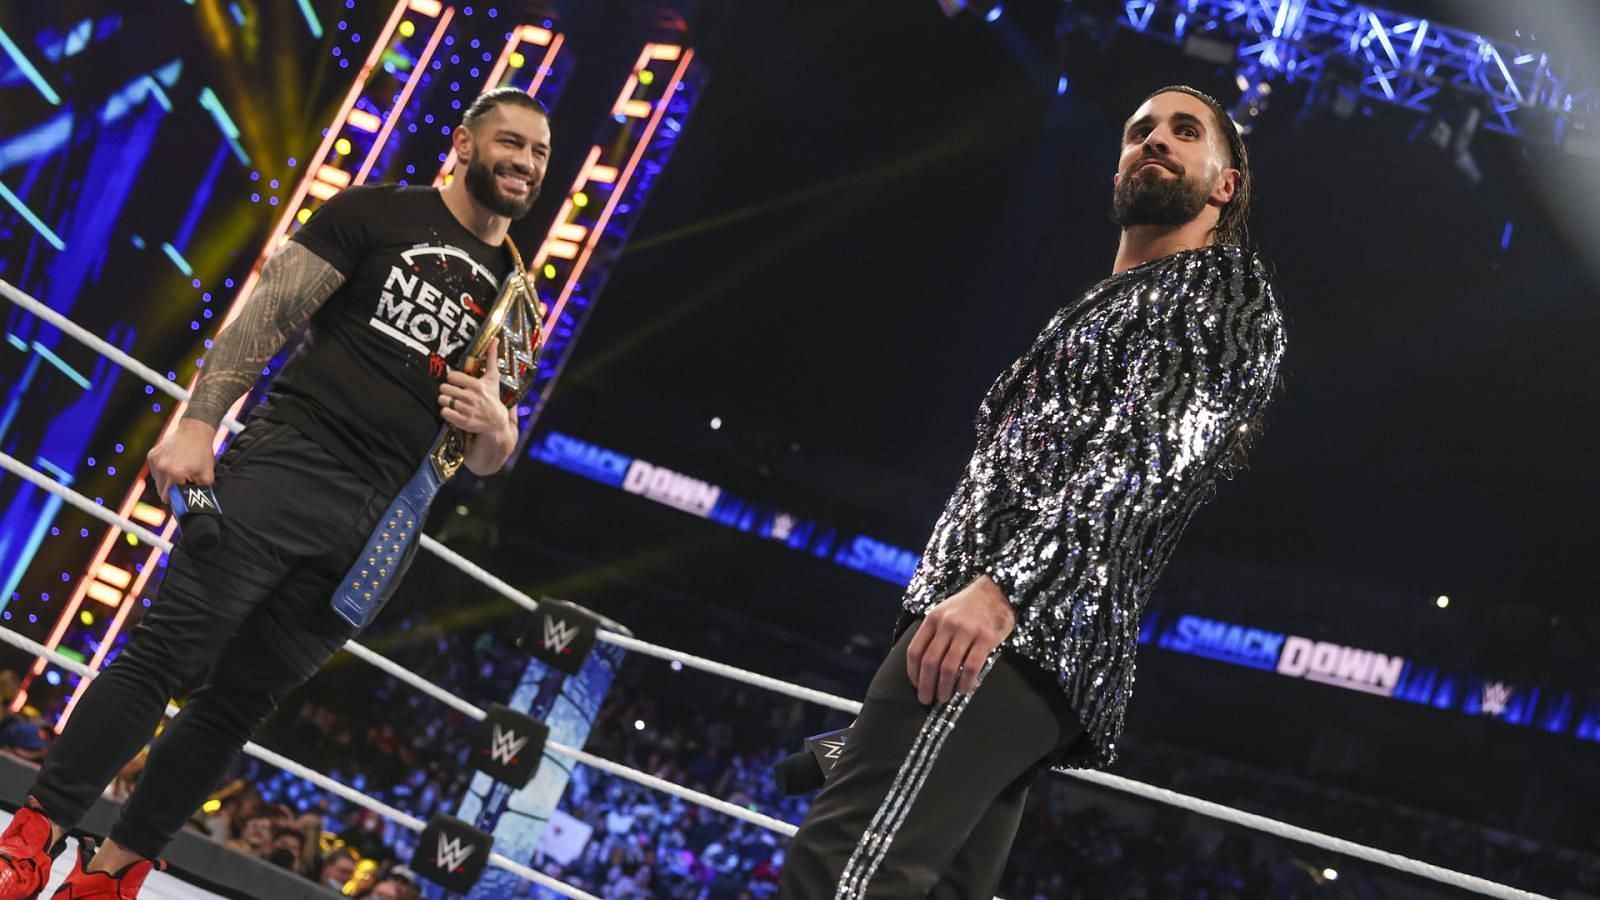 Roman Reigns and Seth Rollins face off at the Royal Rumble